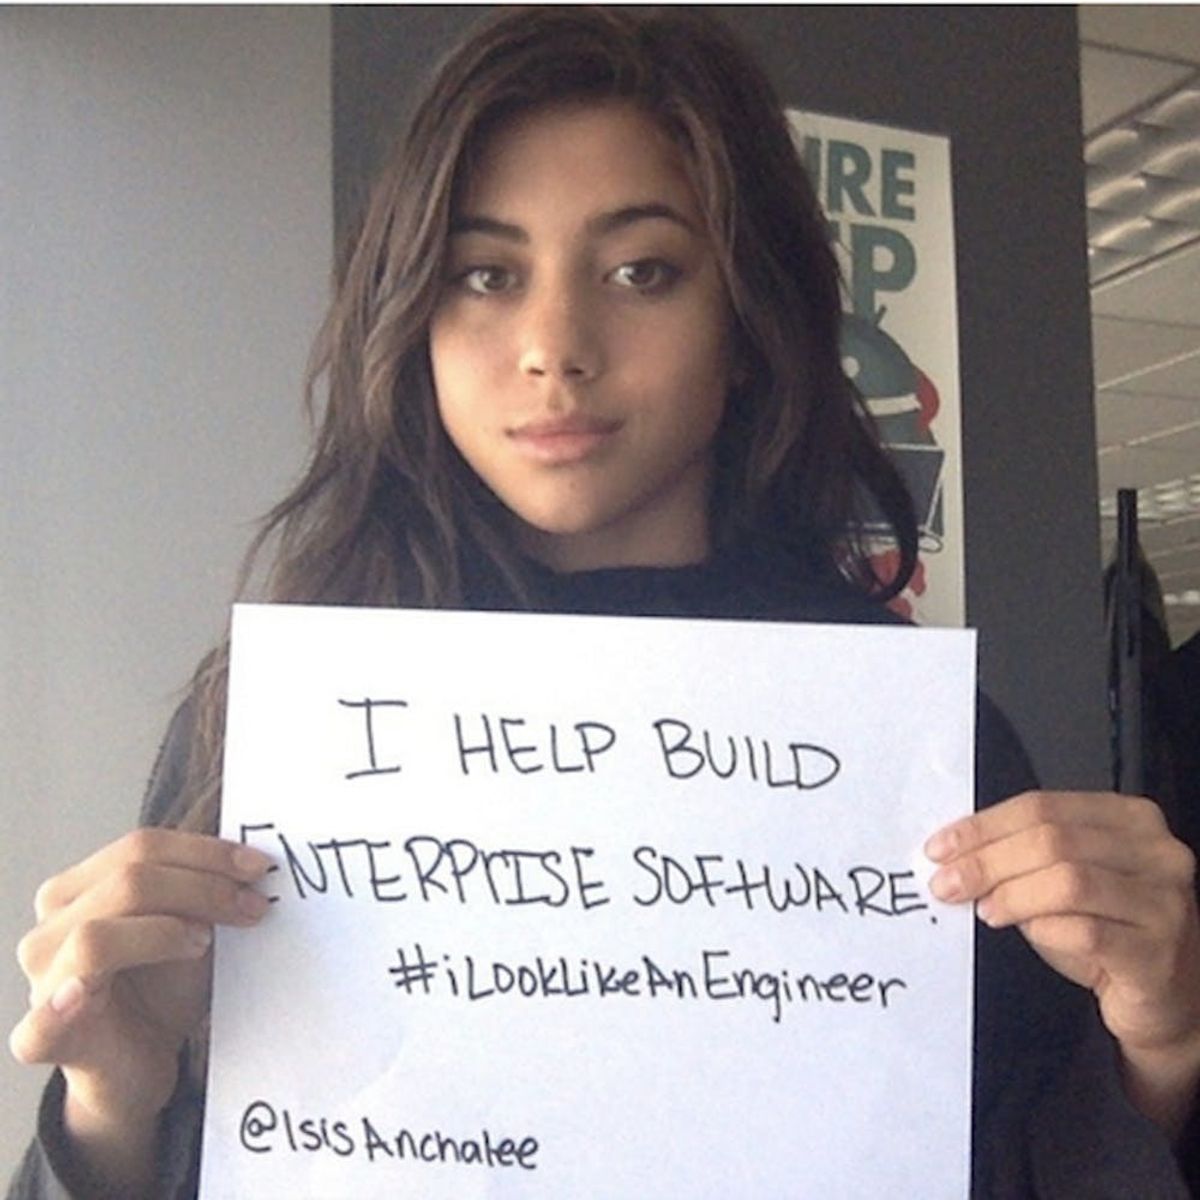 The Hashtag #ILookLikeanEngineer Shows the Many Faces of Women in Tech